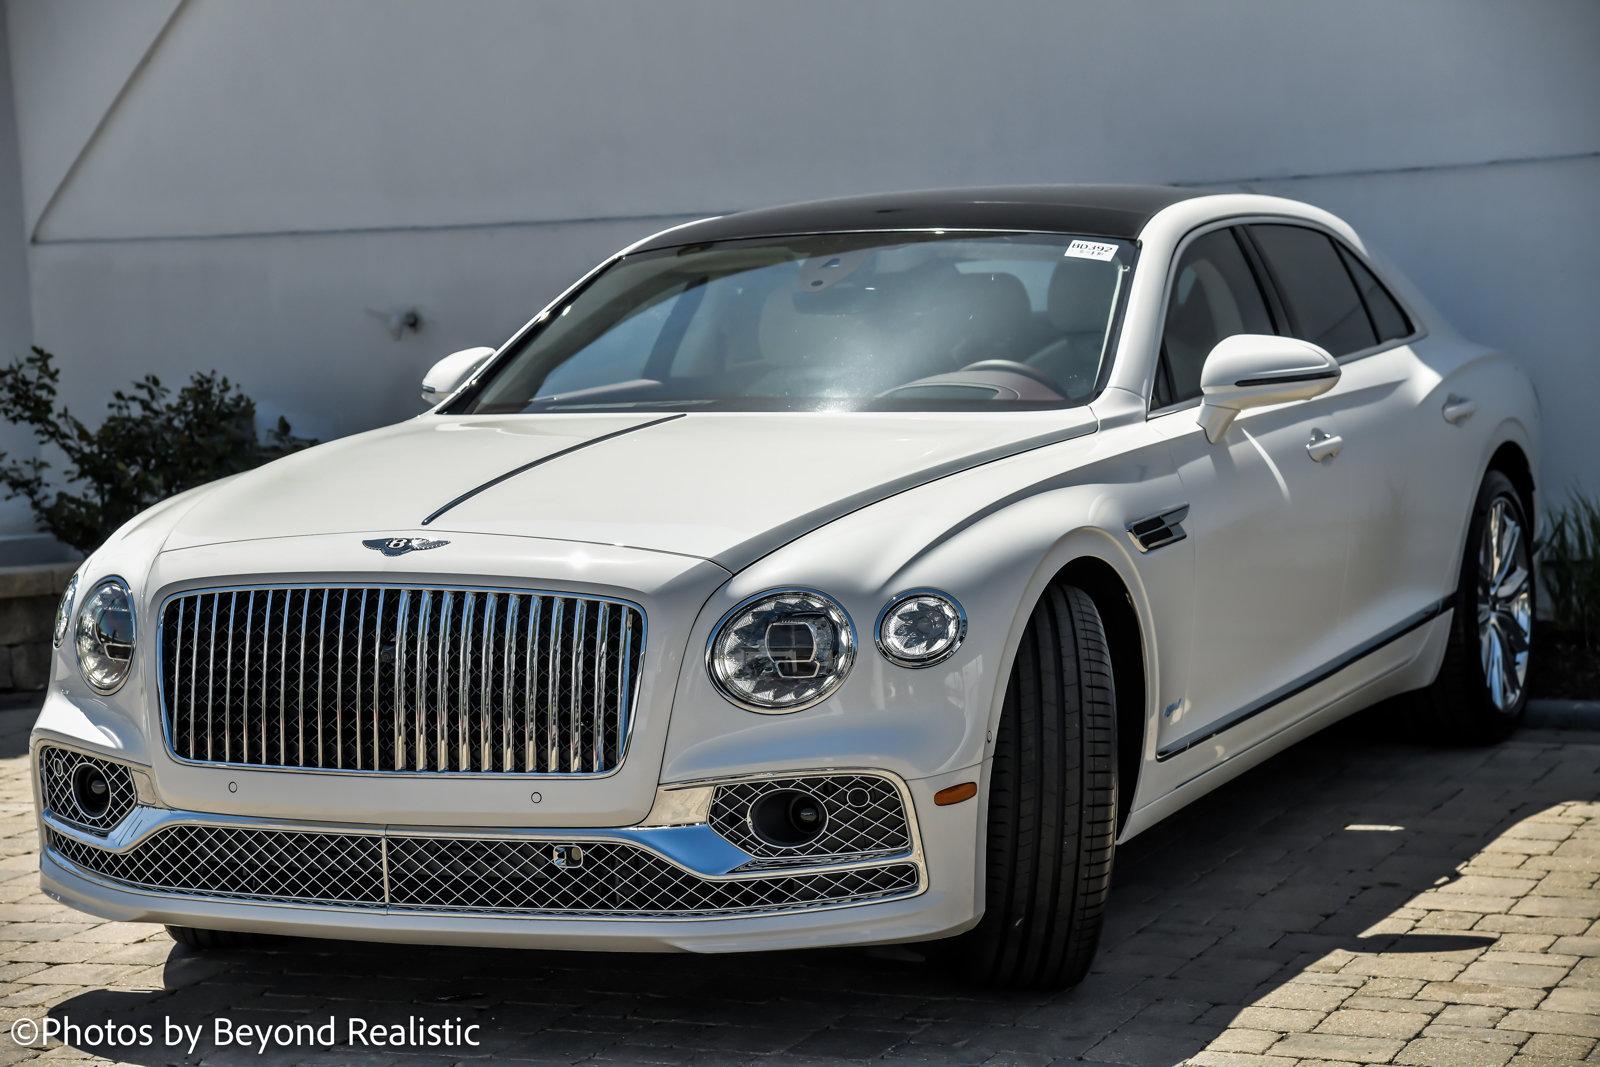 New 2022 Bentley Flying Spur Hybrid Hybrid | Downers Grove, IL